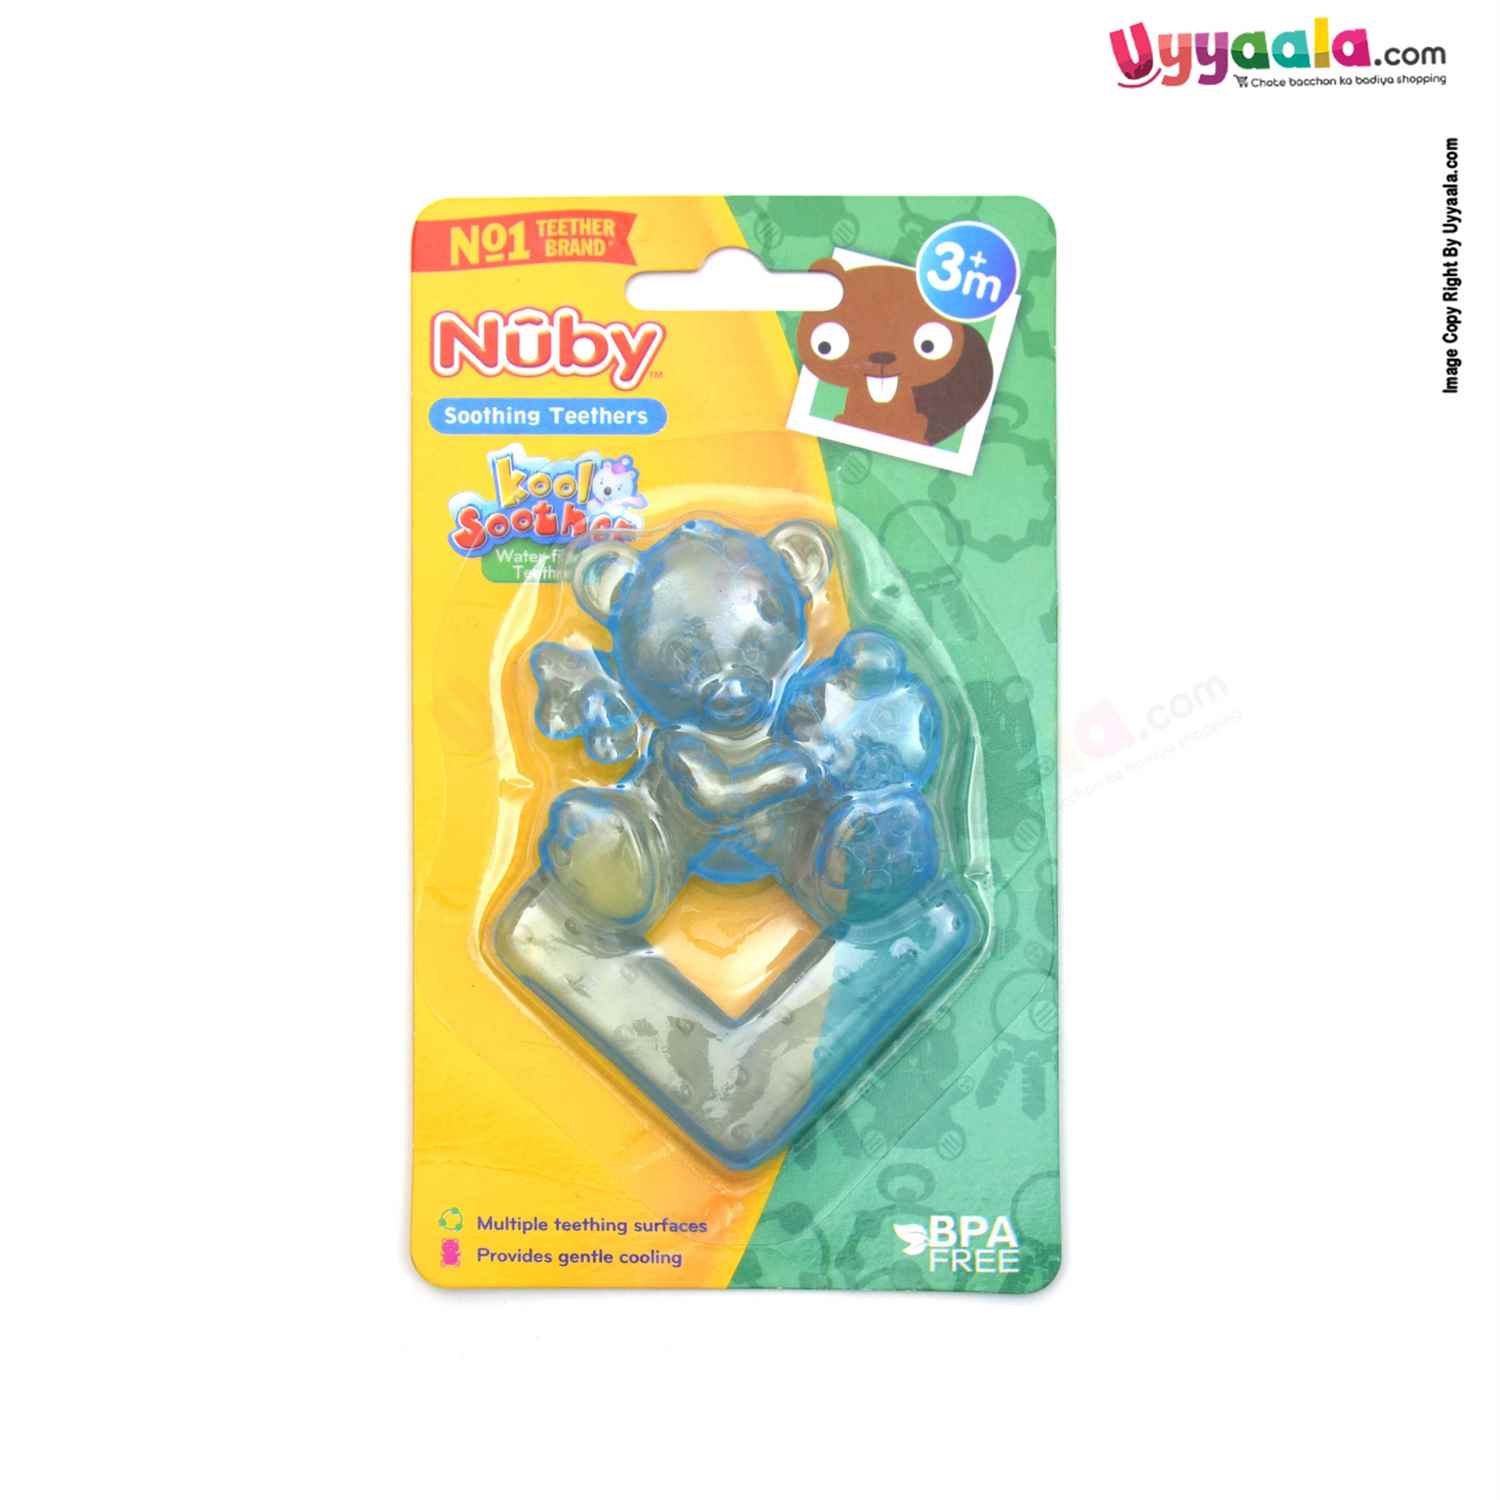 NUBY Water filled soothing teether with bear shape - Blue, 3+m